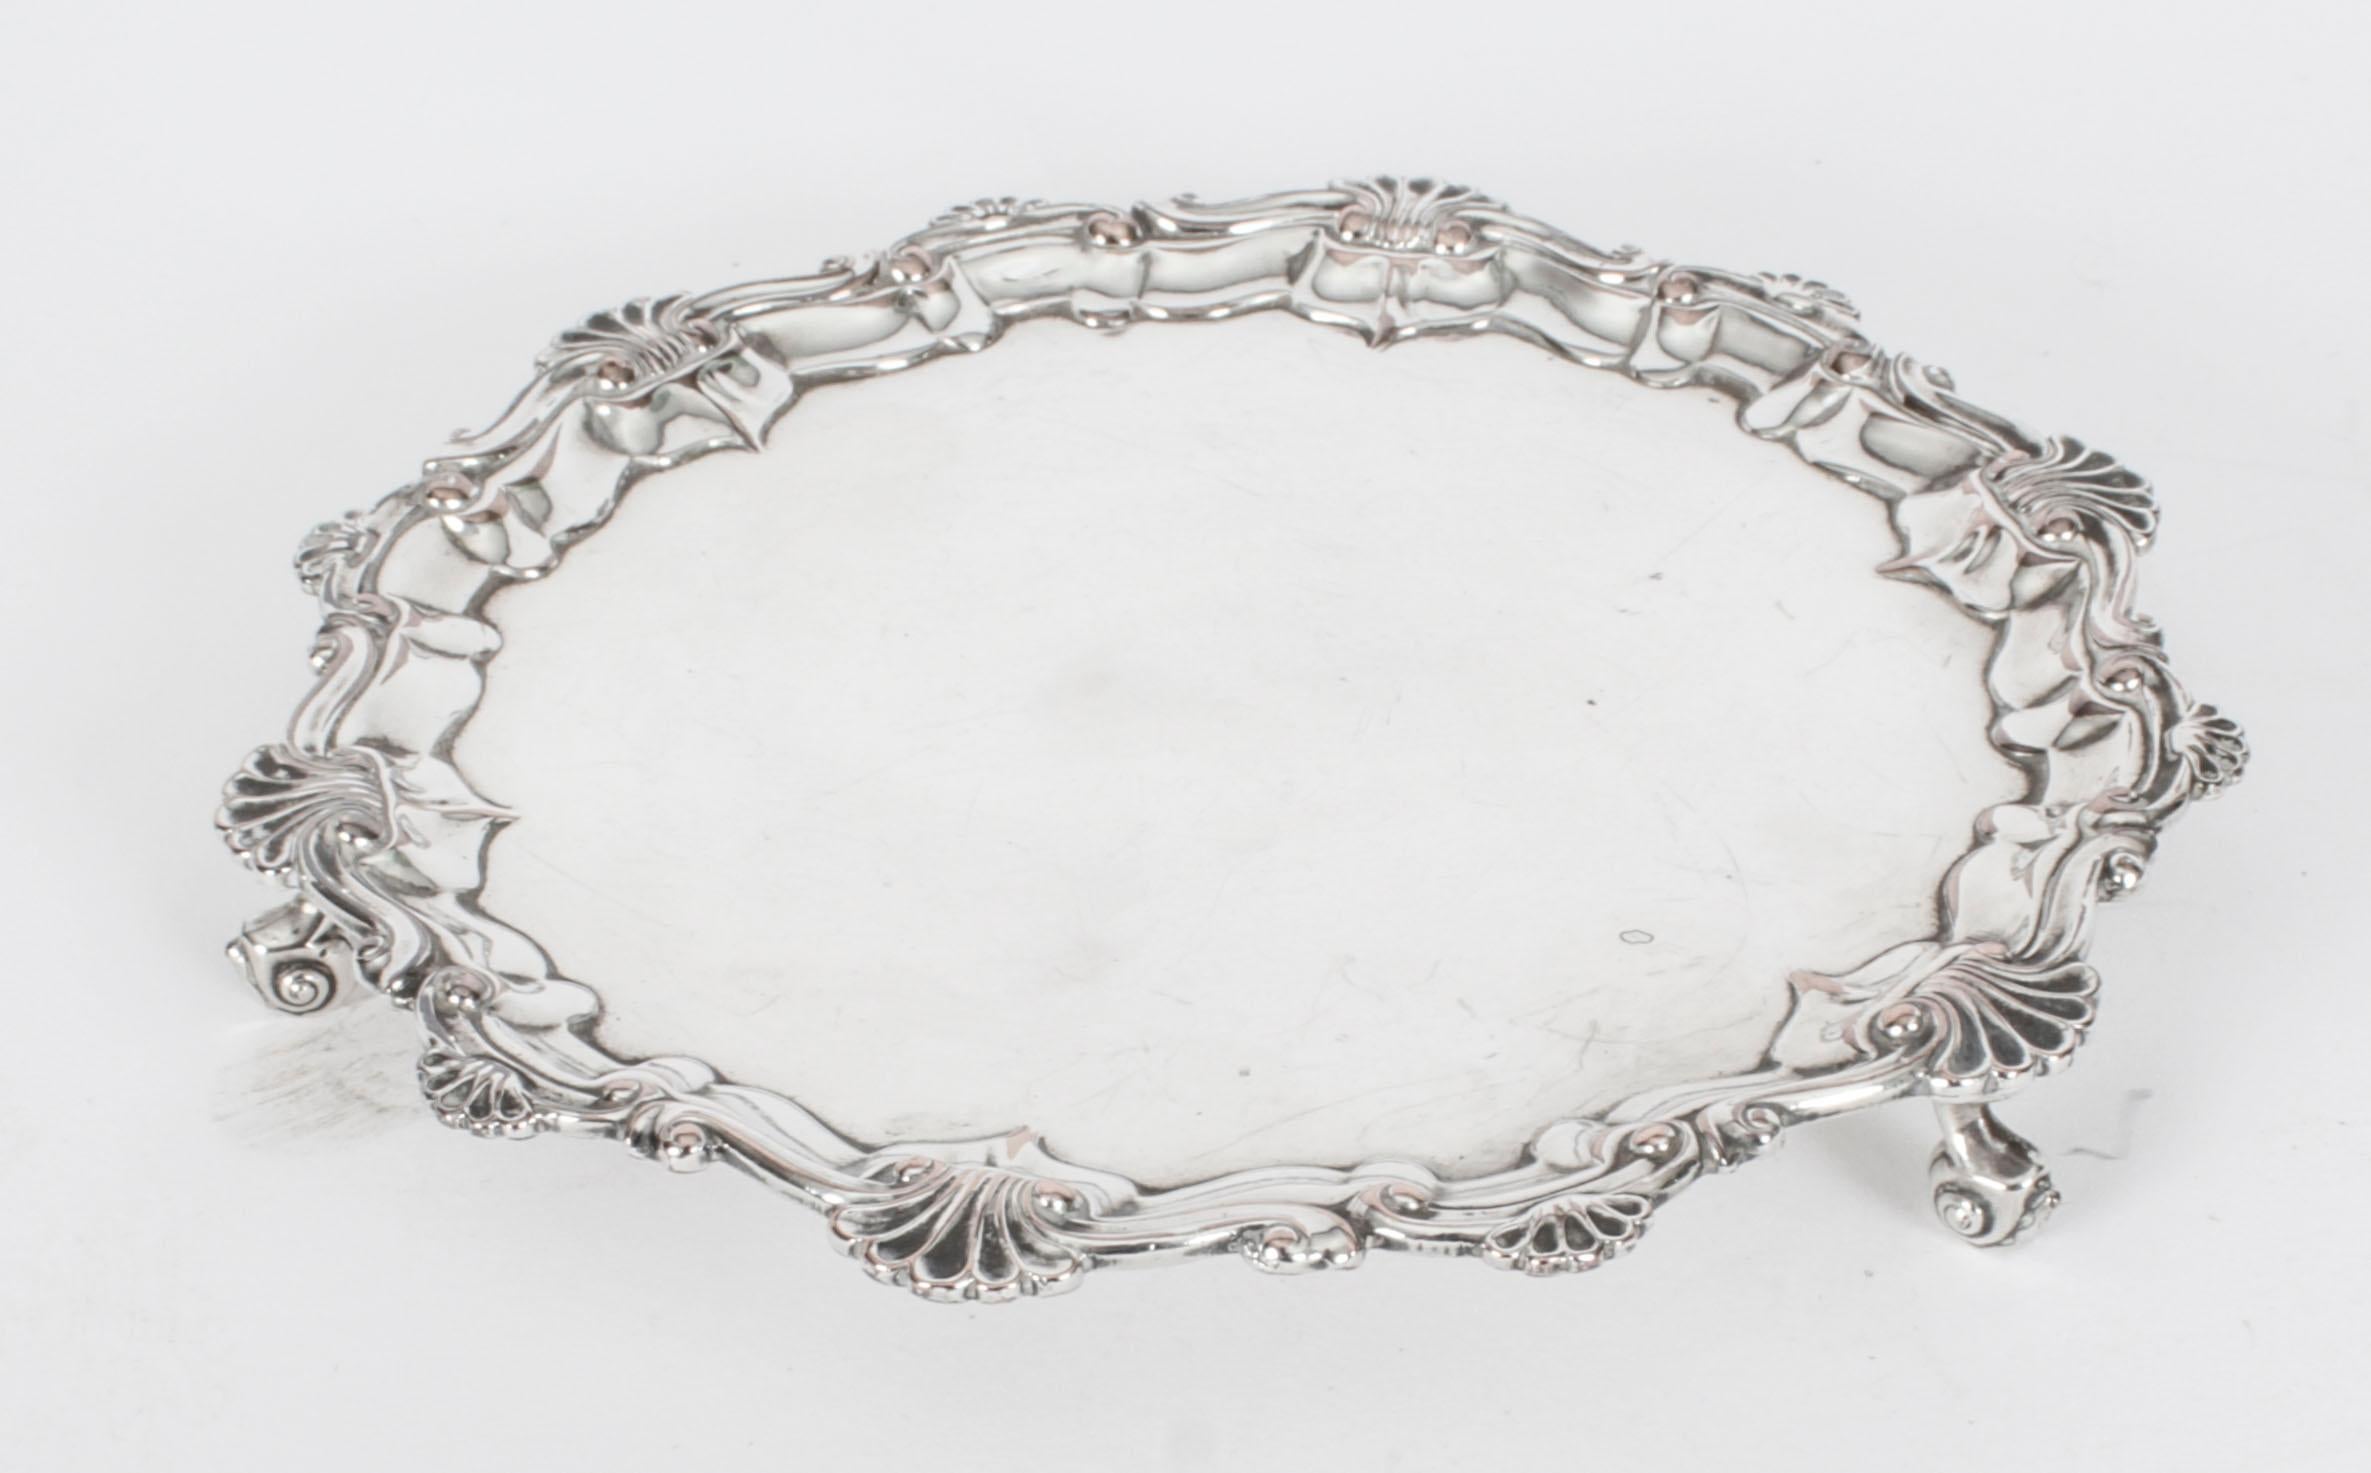 This is an exquisite English antique Old Sheffield Plate salver, circa 1780 in date.
 
The elegant  shaped circular salver features leafy scroll border with the field inlaid with a band of strapwork on tripod feet.
 
Add an elegant touch to your